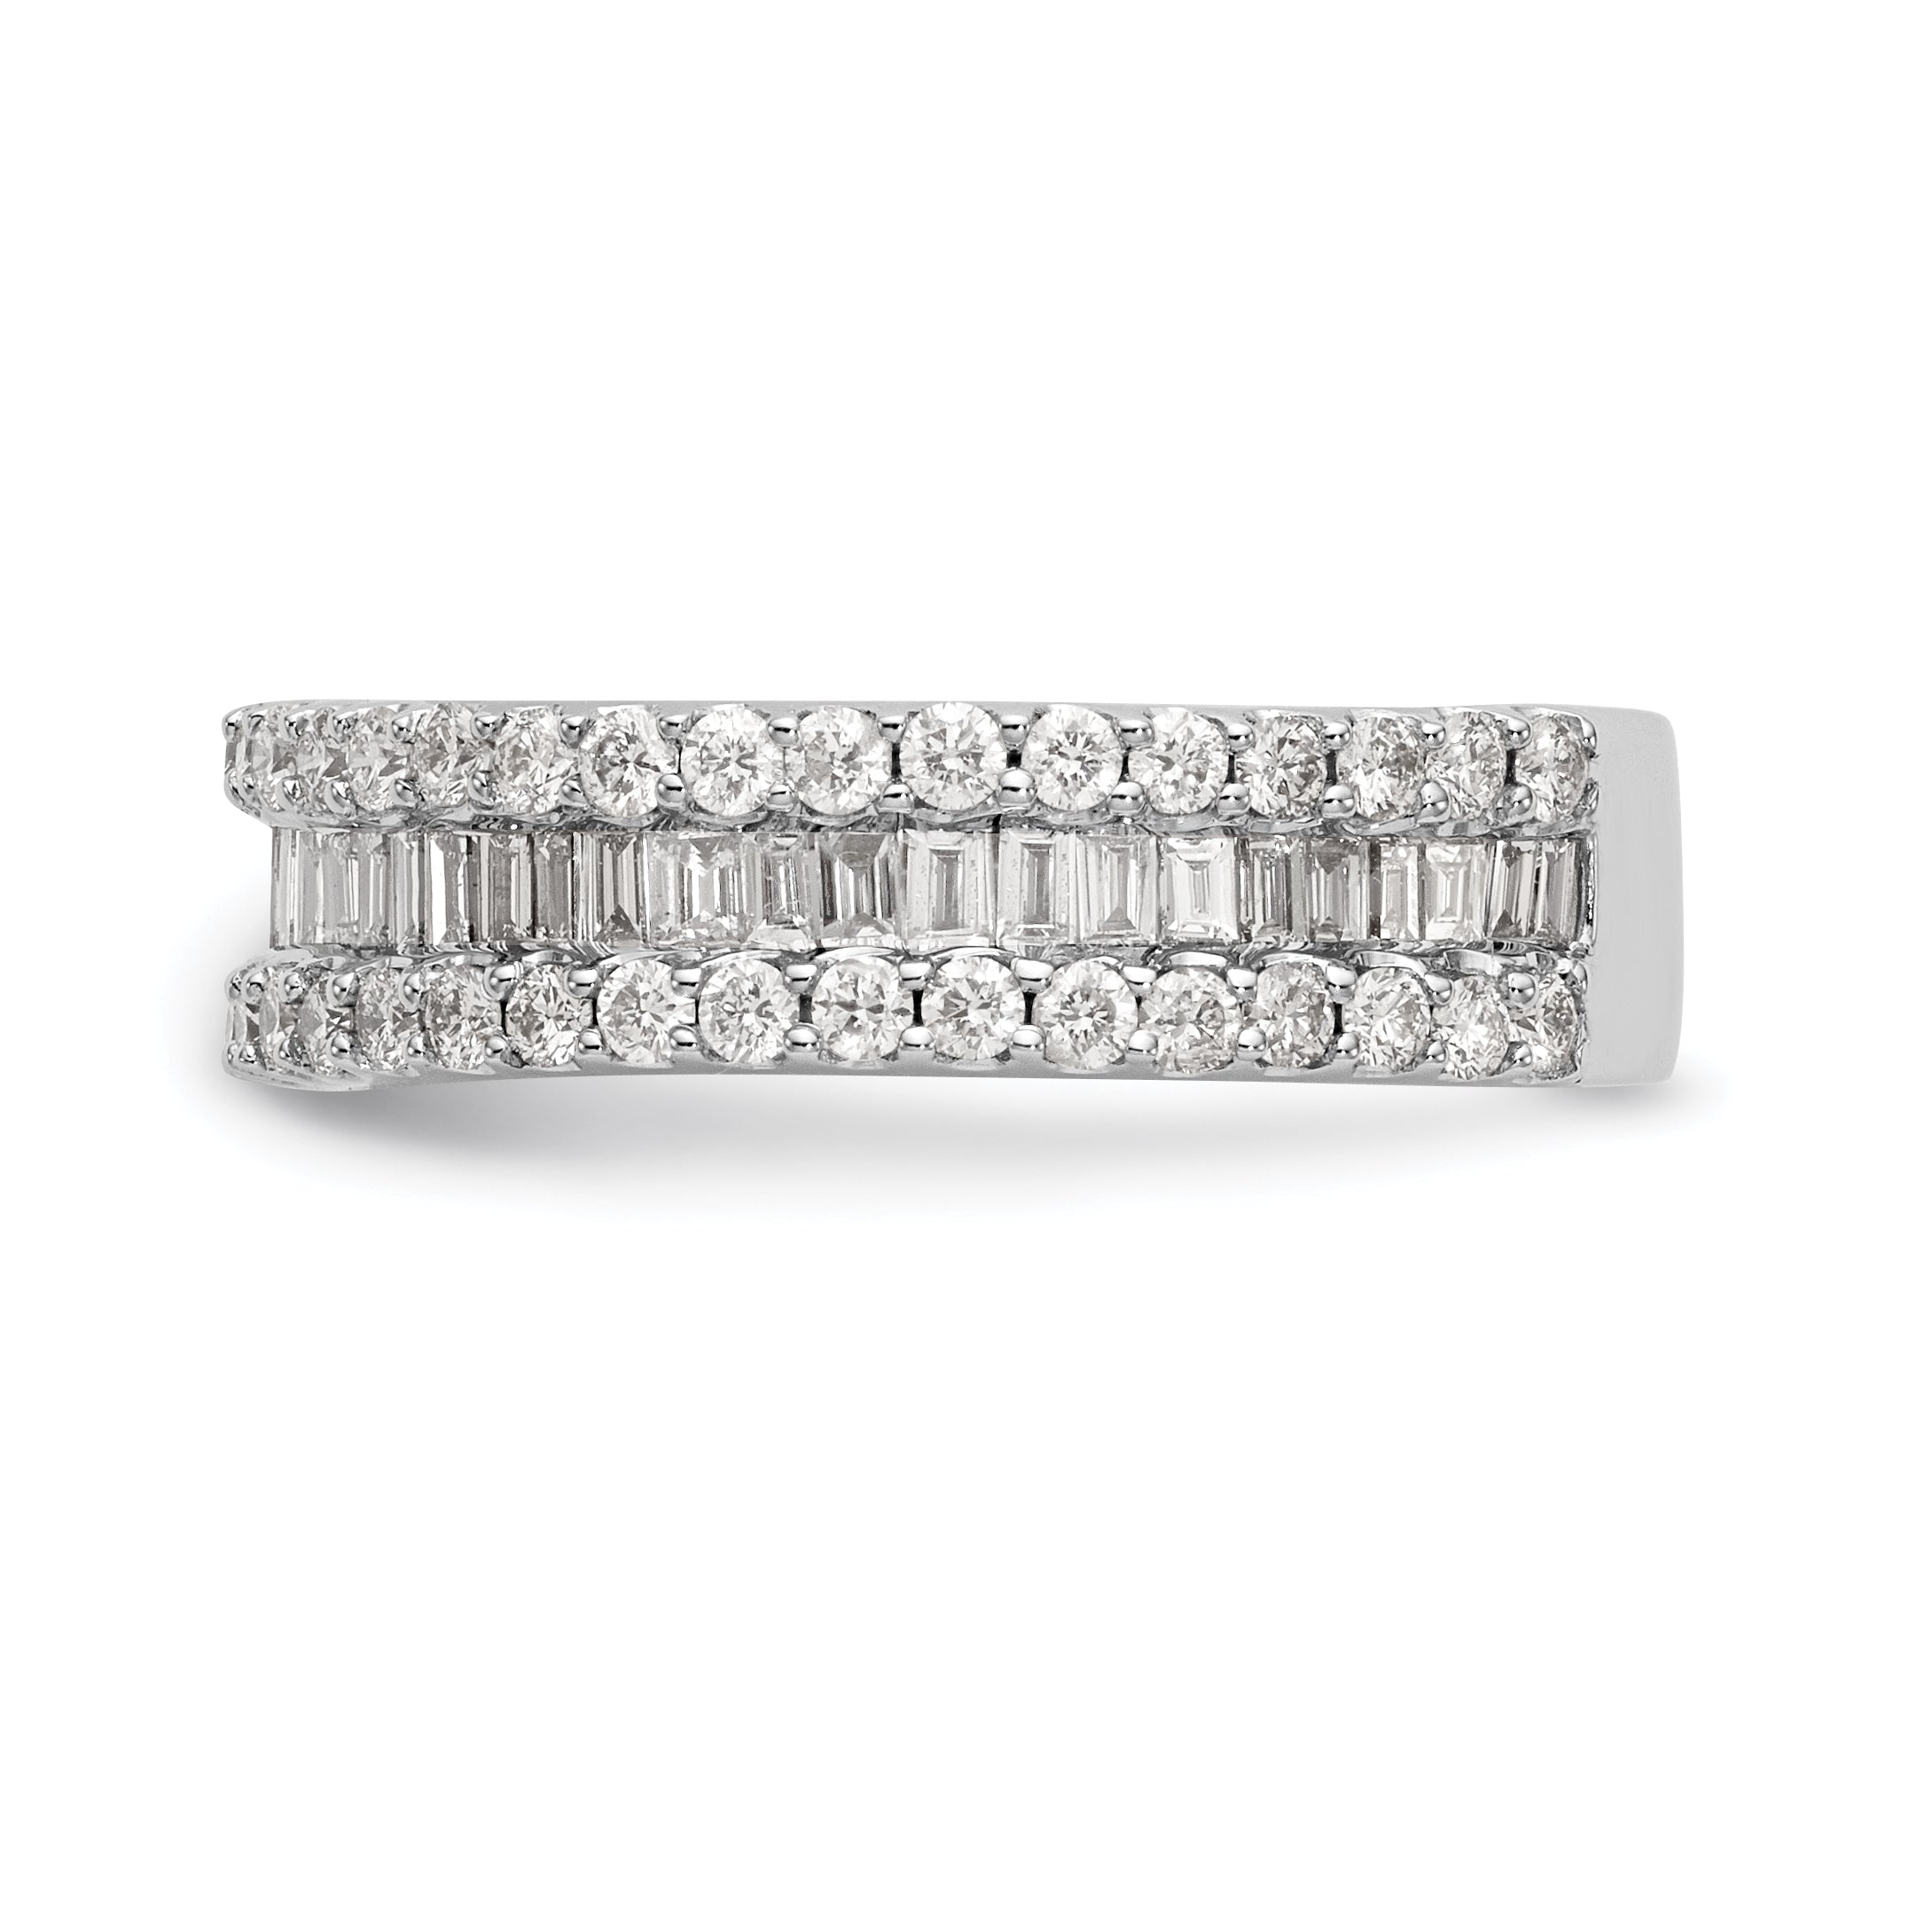 14K White Gold 1.5 carat Baguette/Round Diamond Complete Band